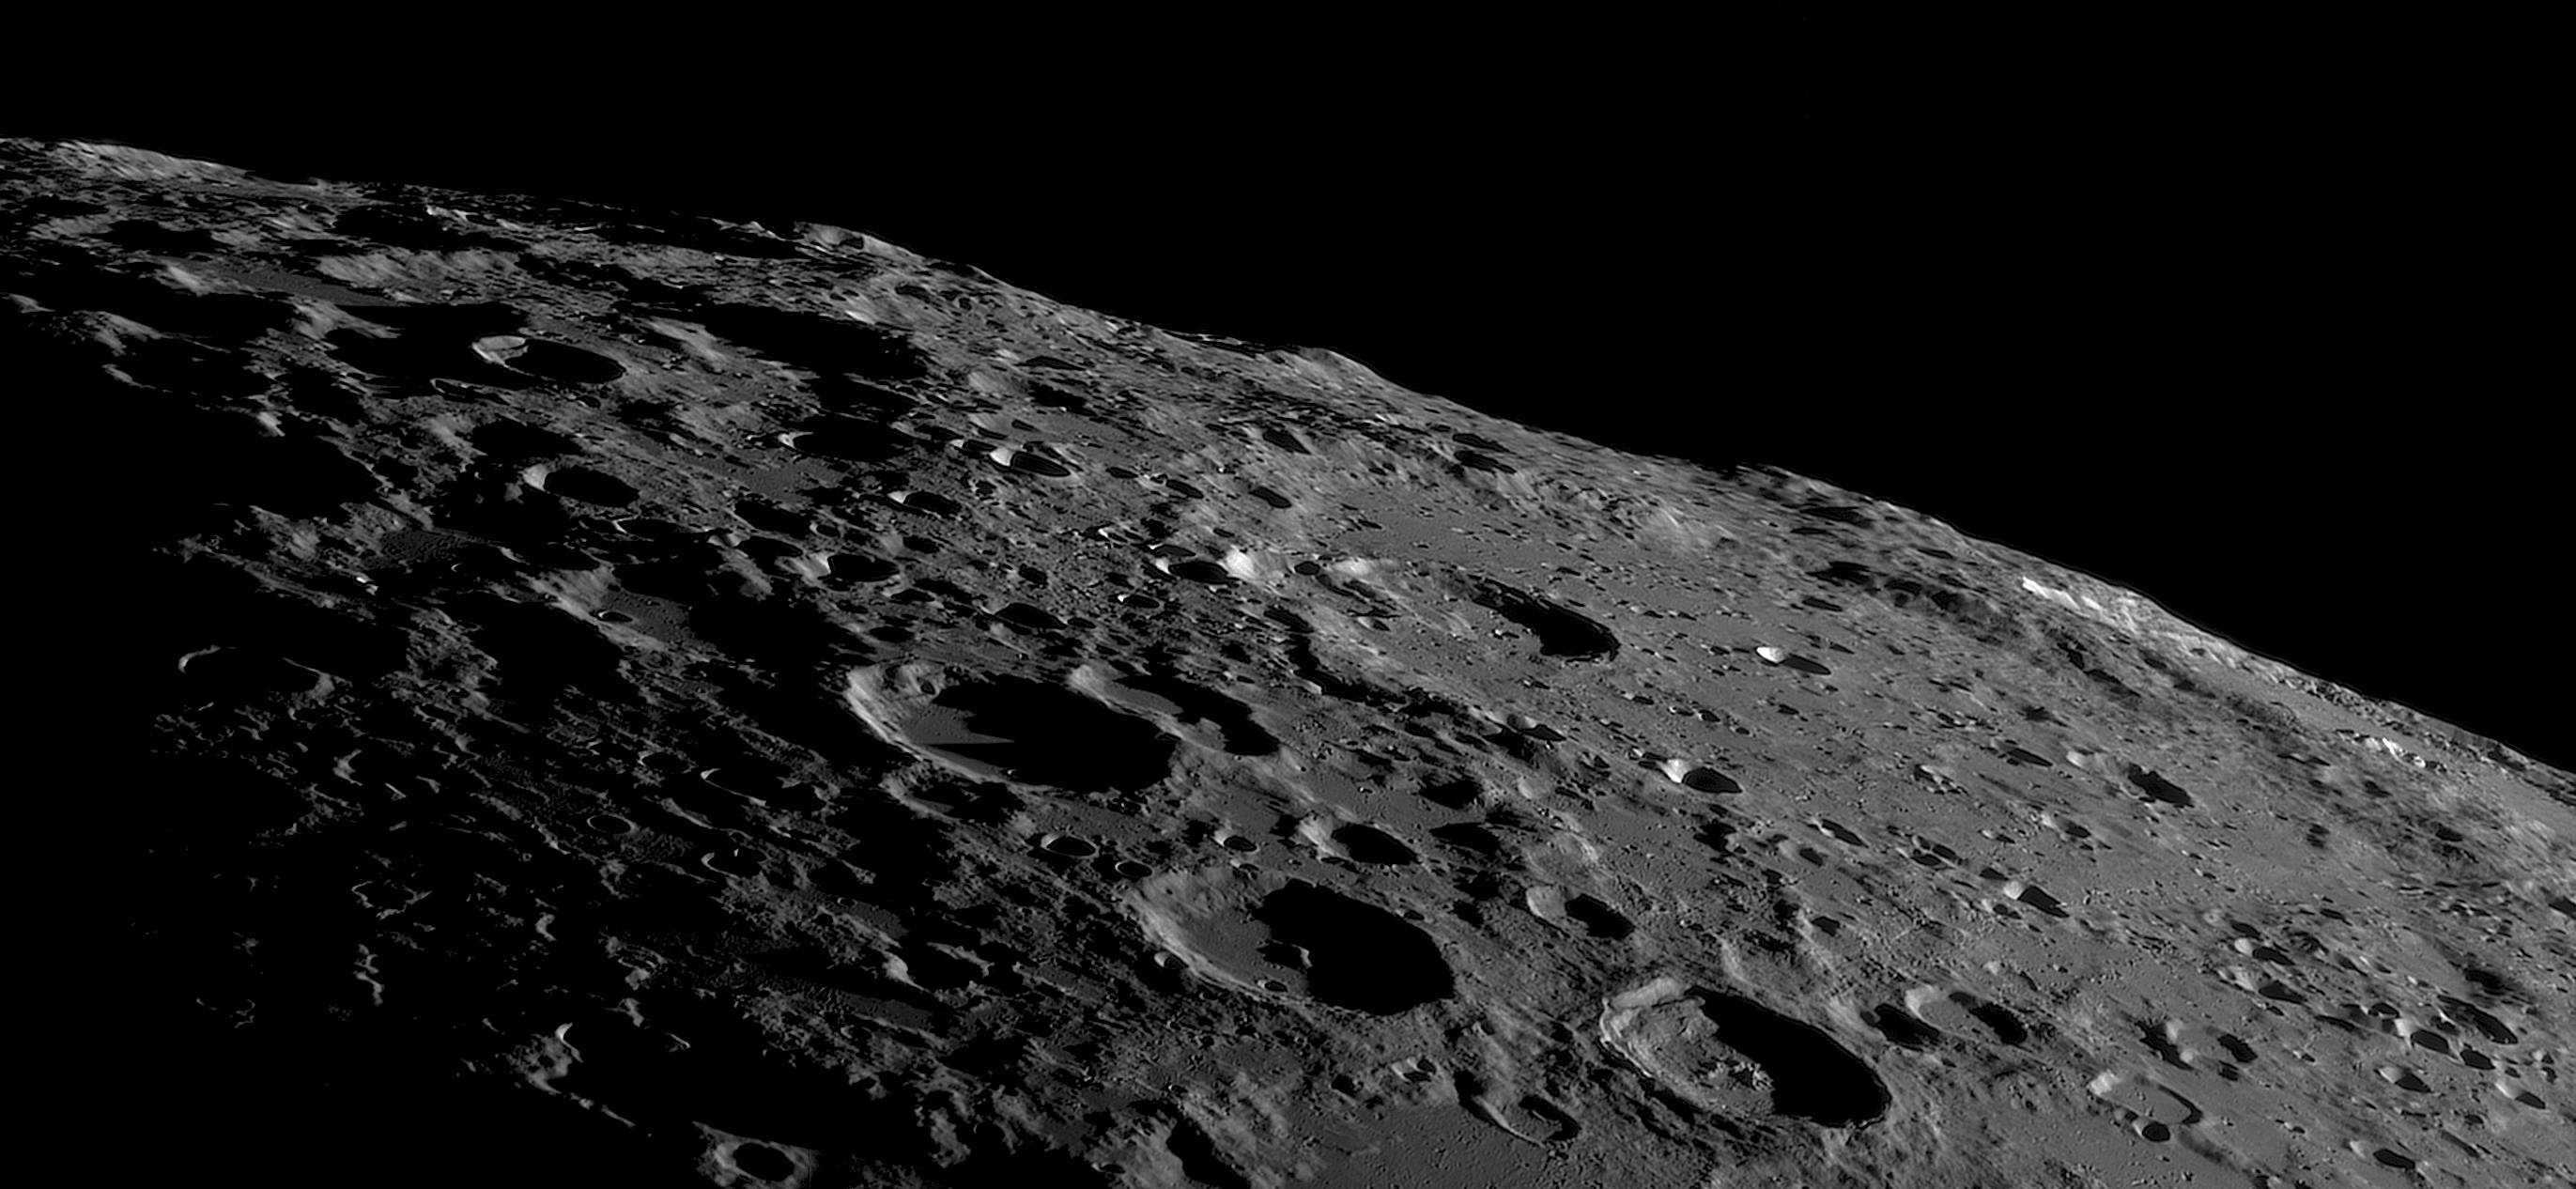 A wide view of the Moon's southern surface. (Photo: © Andrea Vanoni)